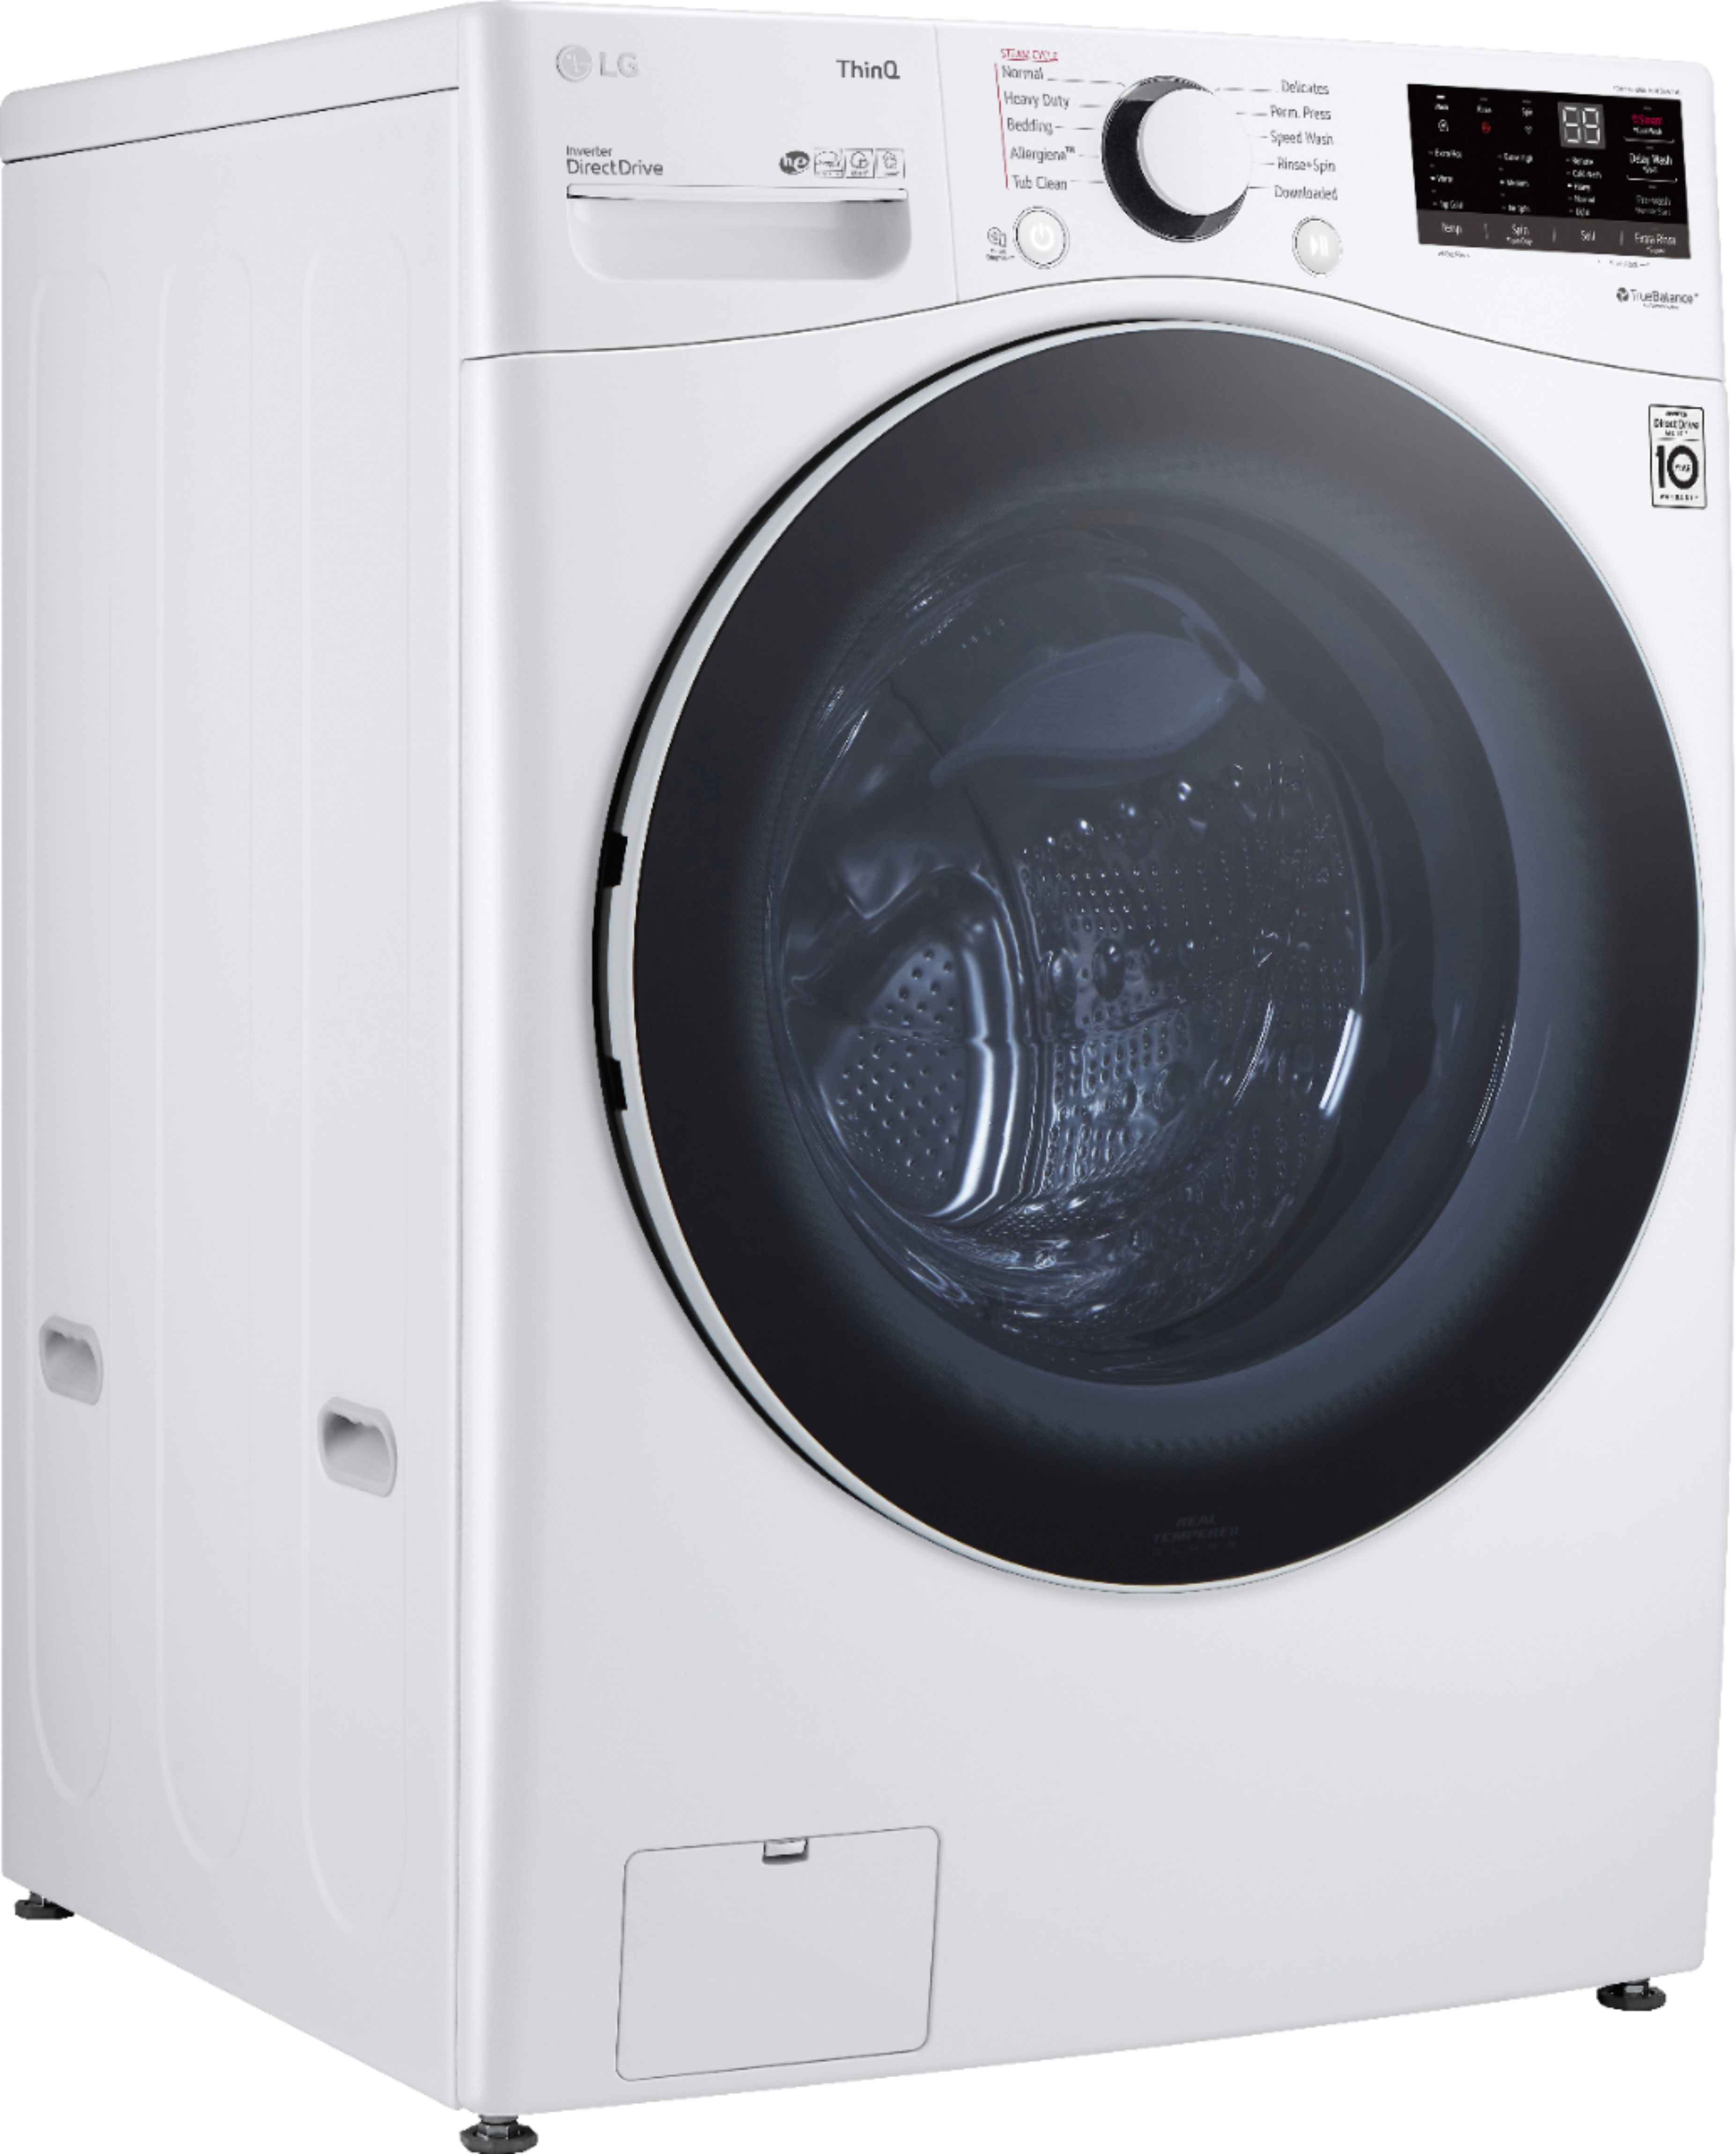 Angle View: LG - 4.5 Cu. Ft. High-Efficiency Stackable Smart Front Load Washer with Steam and 6Motion Technology - White